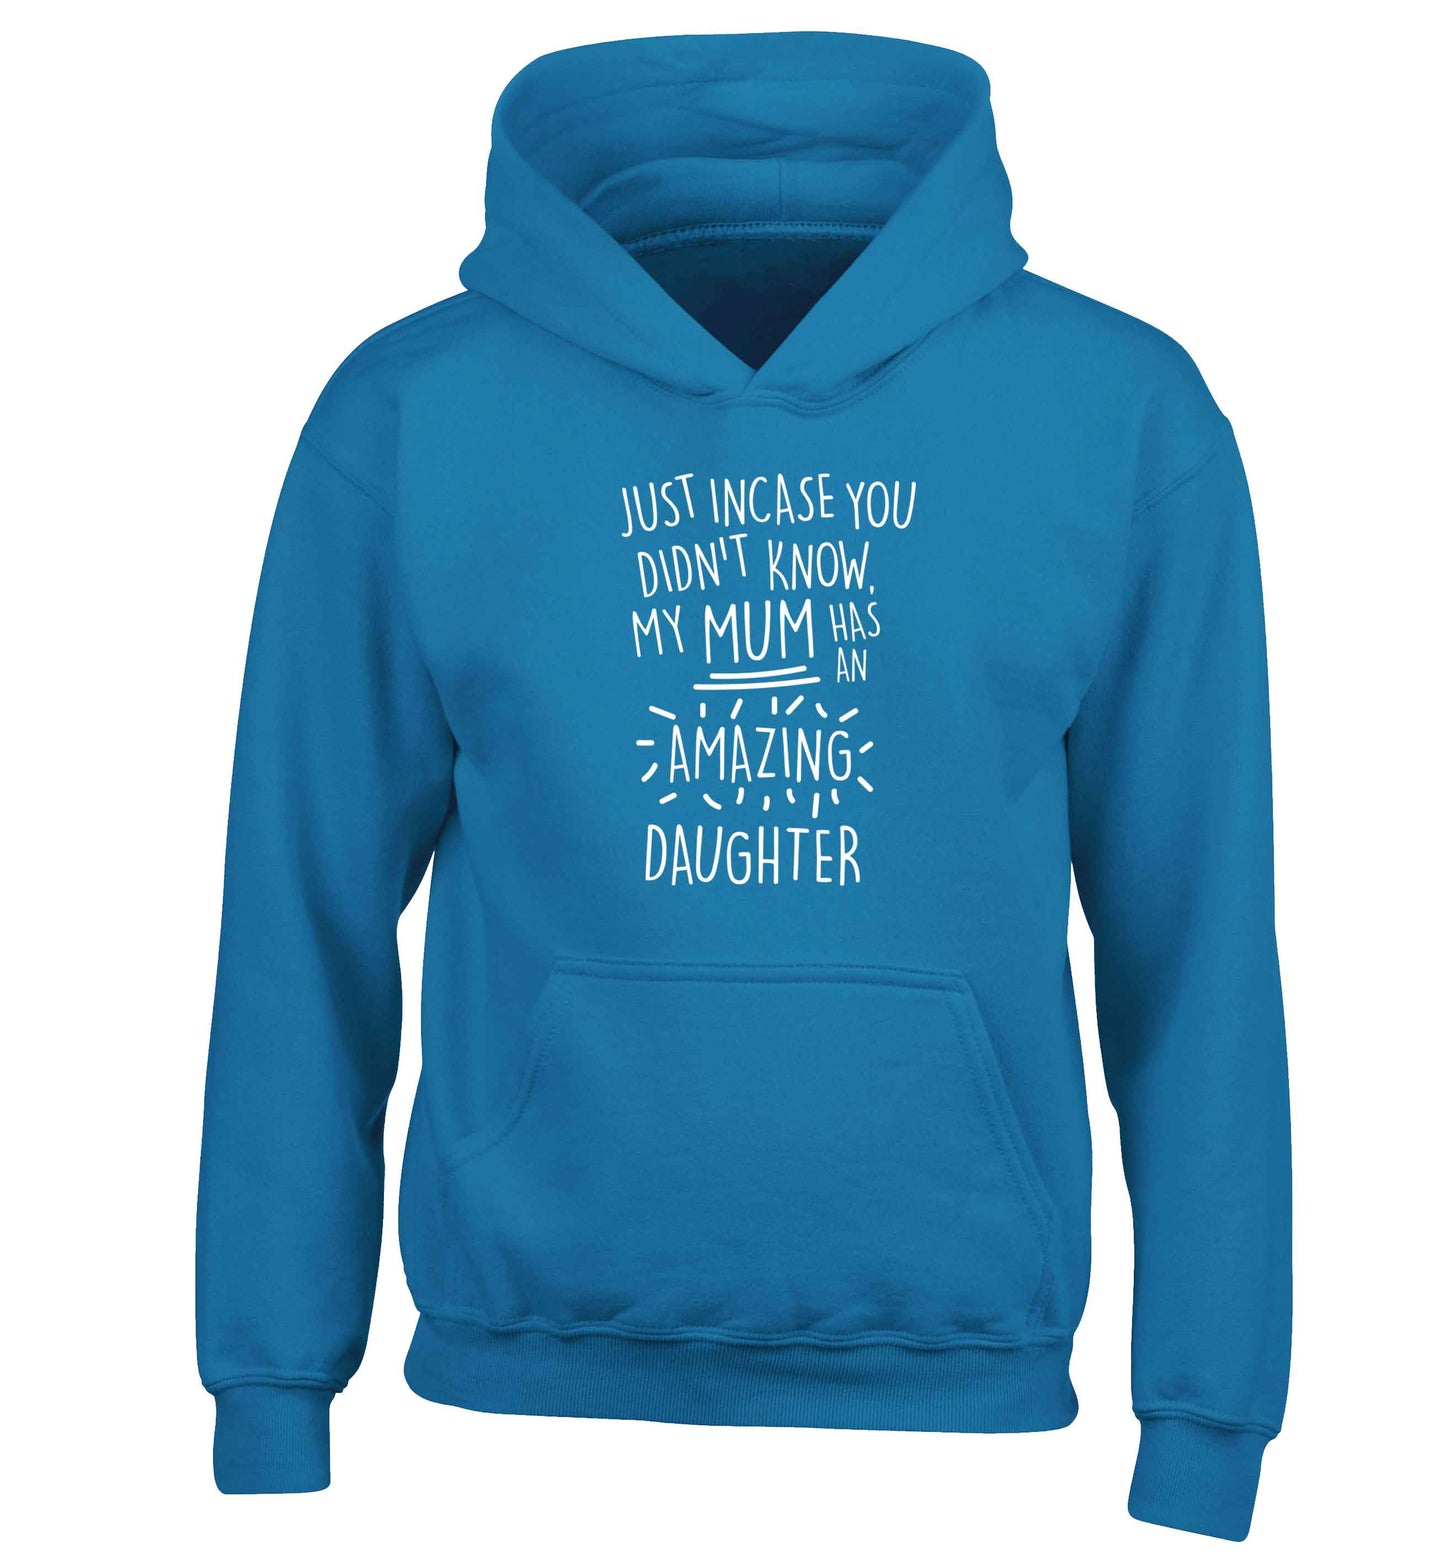 Just incase you didn't know my mum has an amazing daughter children's blue hoodie 12-13 Years